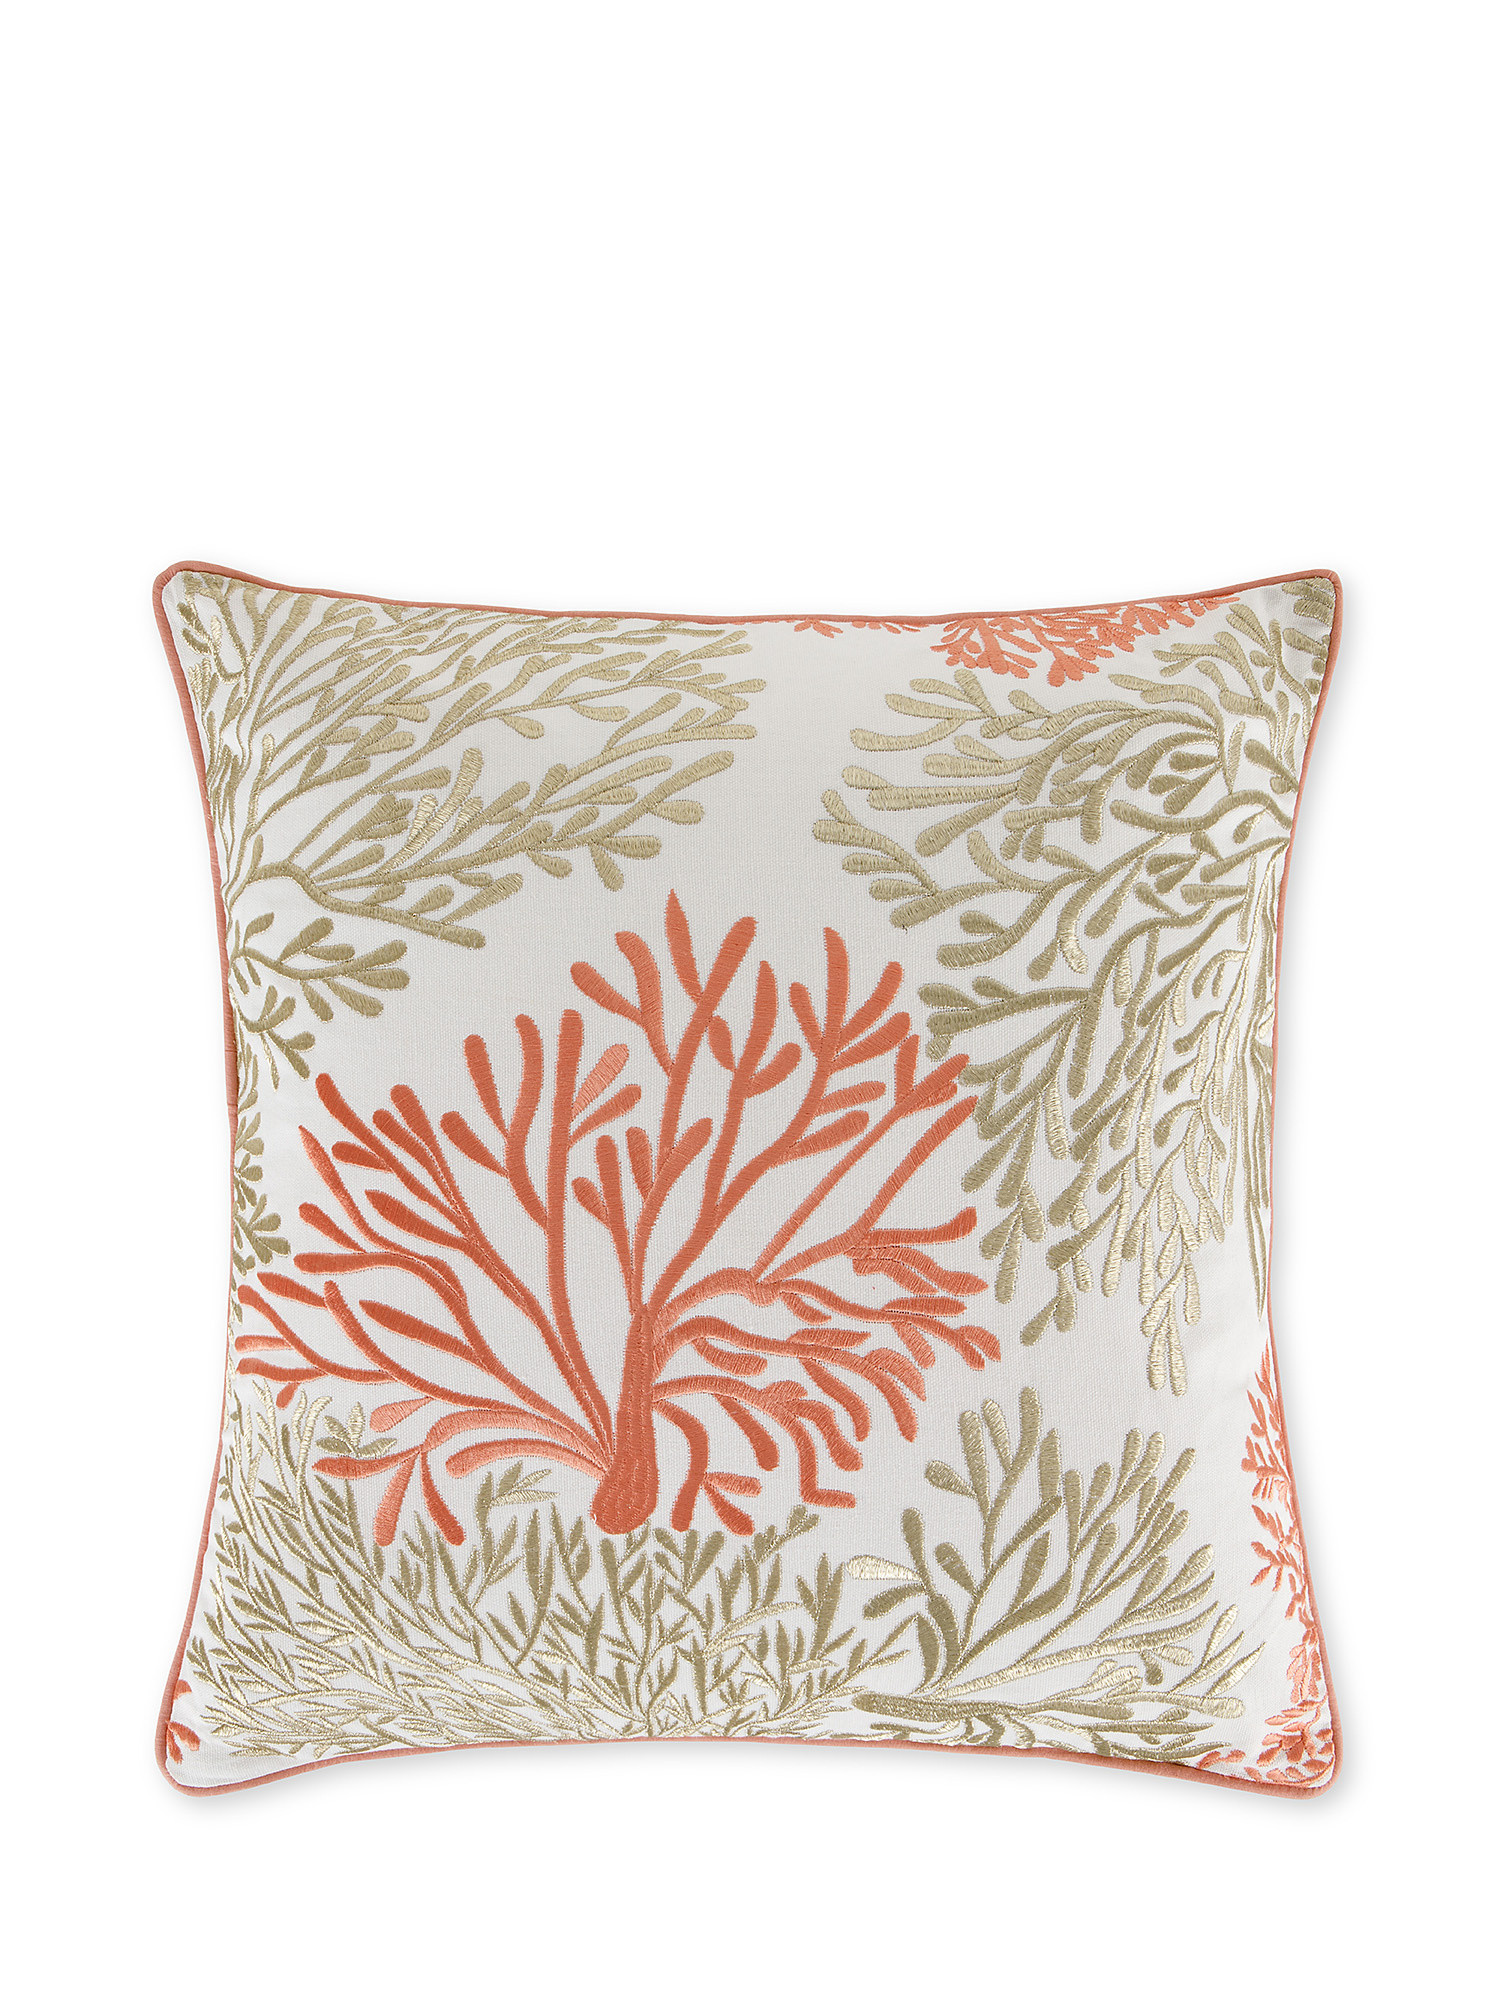 Coral embroidery cushion 45x45cm, White, large image number 0